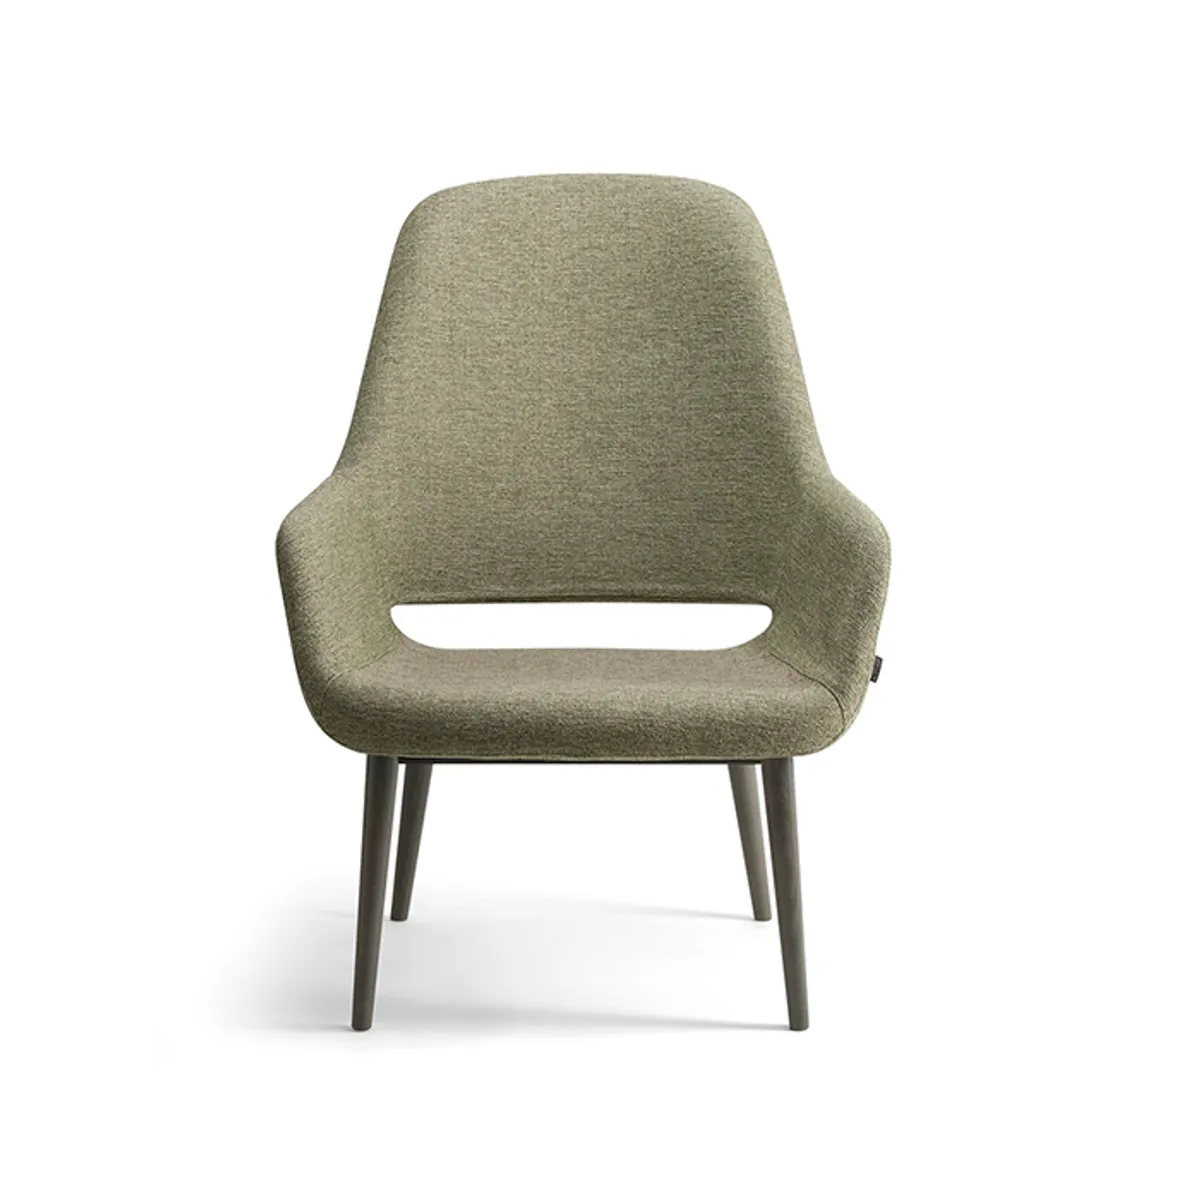 Somers Highbackchair Insideoutcontracts